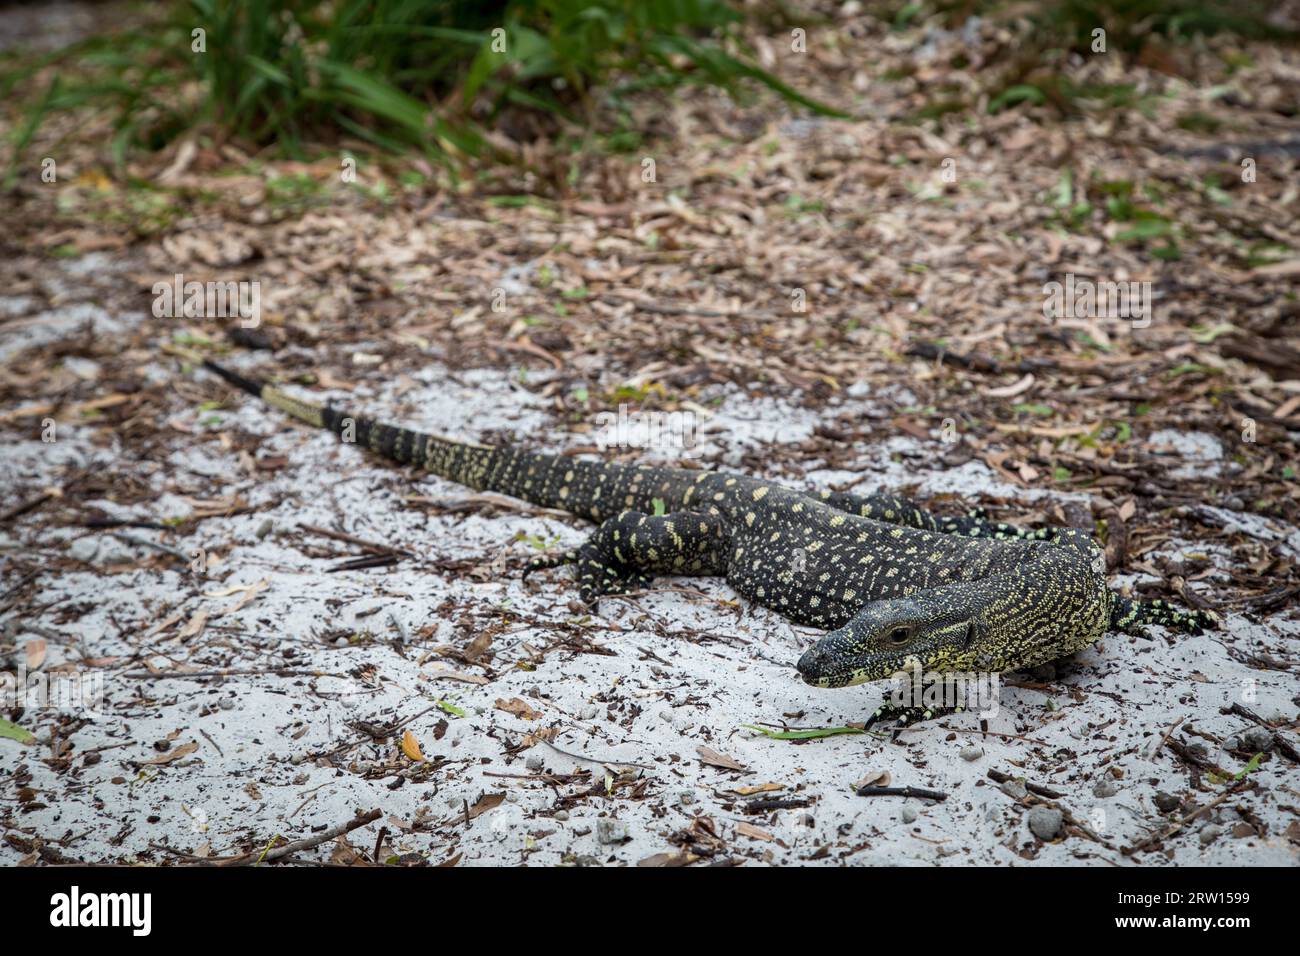 A large monitor lizard at Whithaven Beach on the Whitsunday Islands in Queensland, Australia Stock Photo